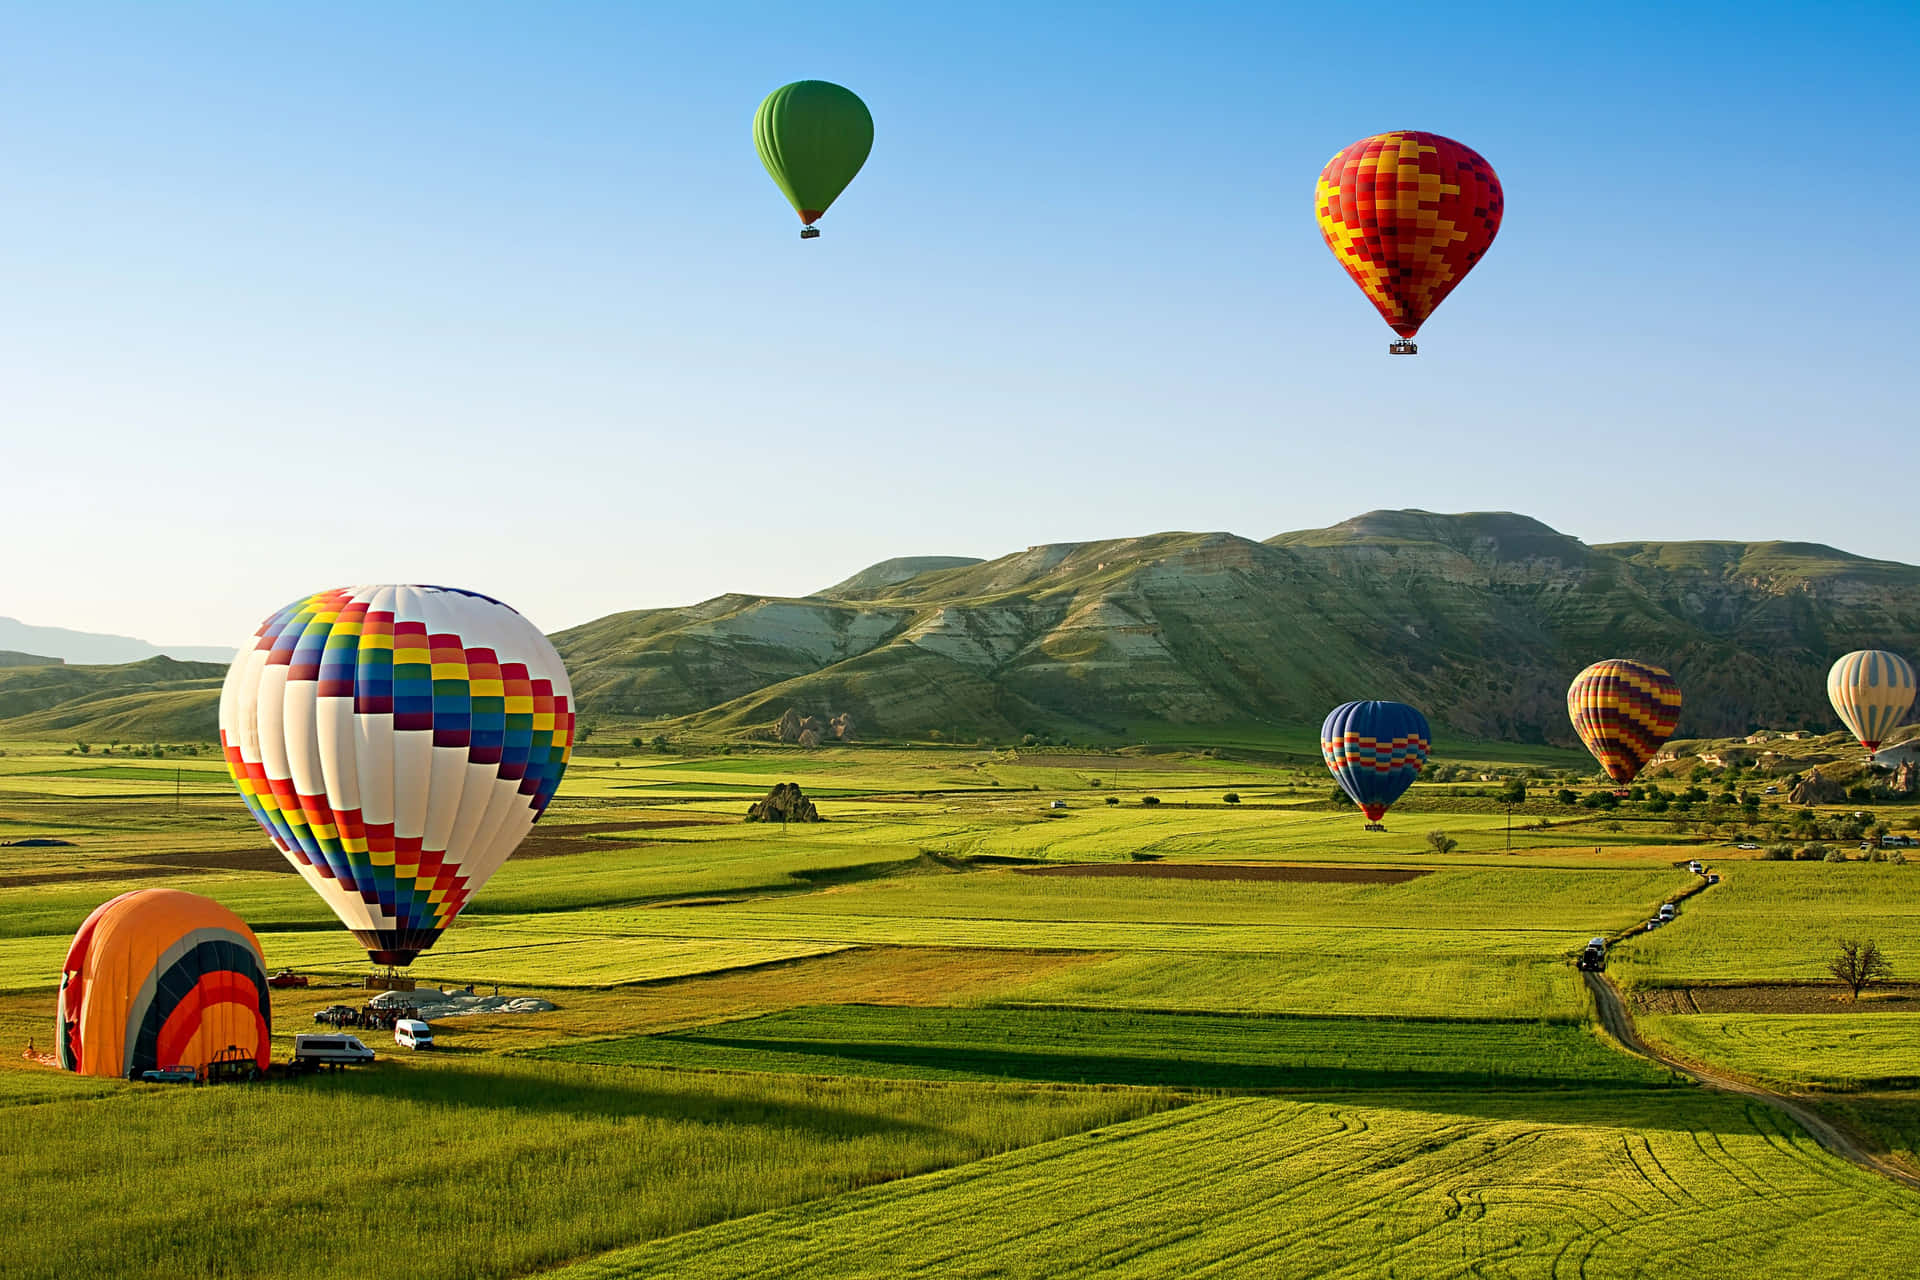 Enjoy a birds-eye view of the countryside with a majestic hot air balloon ride